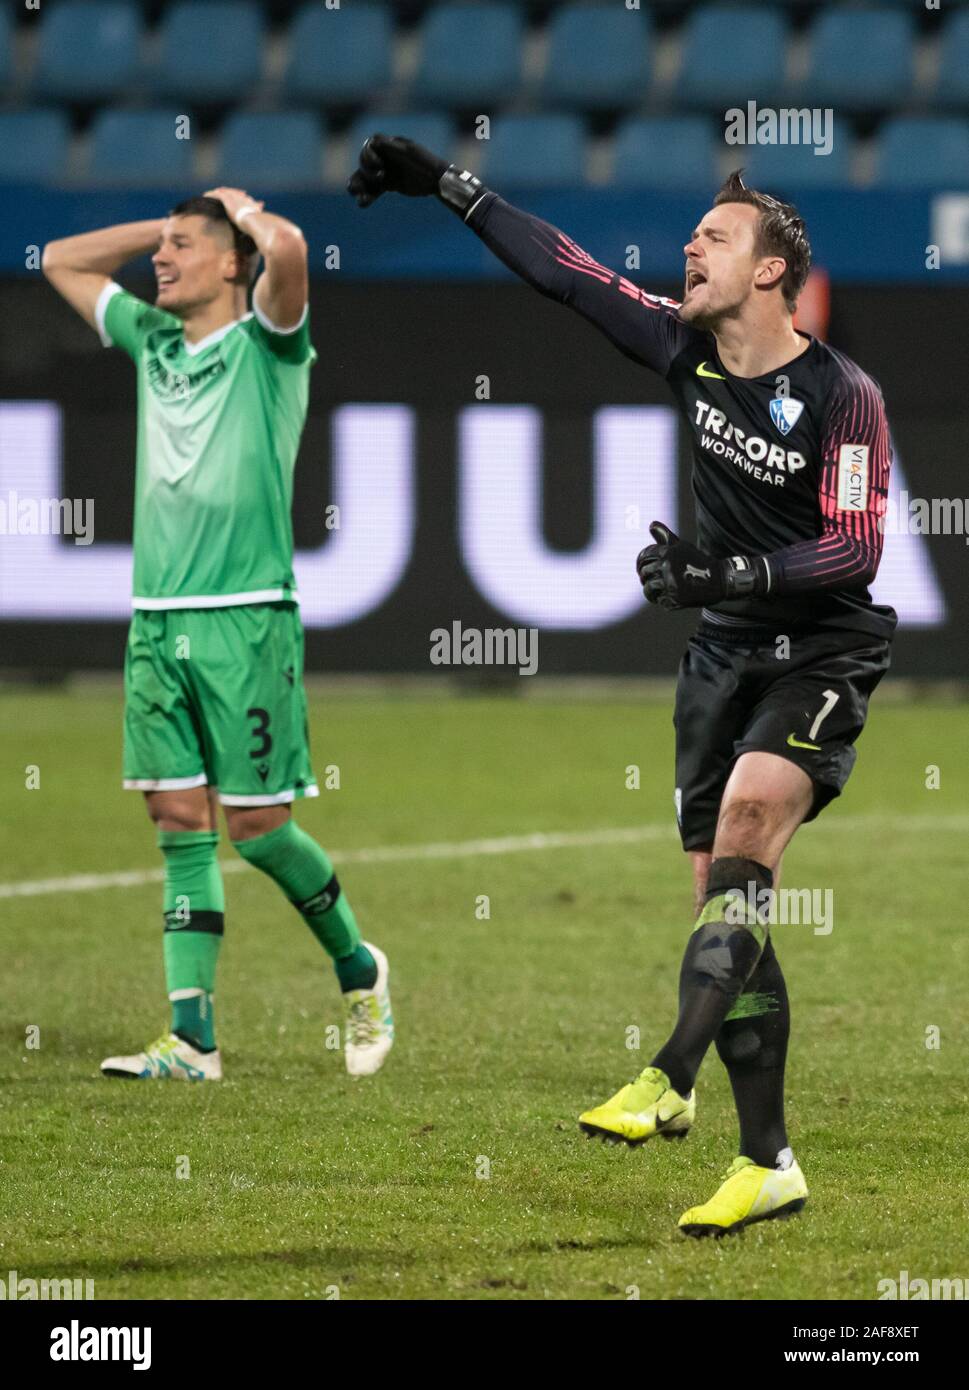 13 December 2019, North Rhine-Westphalia, Bochum: Soccer: 2nd Bundesliga, VfL Bochum - Hannover 96, 17th matchday in the Vonovia Ruhrstadion. Bochum goalkeeper Manuel Riemann (r) cheers after a parade. Miiko Albornoz from Hanover grabs his head. Photo: Bernd Thissen/dpa - IMPORTANT NOTE: In accordance with the requirements of the DFL Deutsche Fußball Liga or the DFB Deutscher Fußball-Bund, it is prohibited to use or have used photographs taken in the stadium and/or the match in the form of sequence images and/or video-like photo sequences. Stock Photo